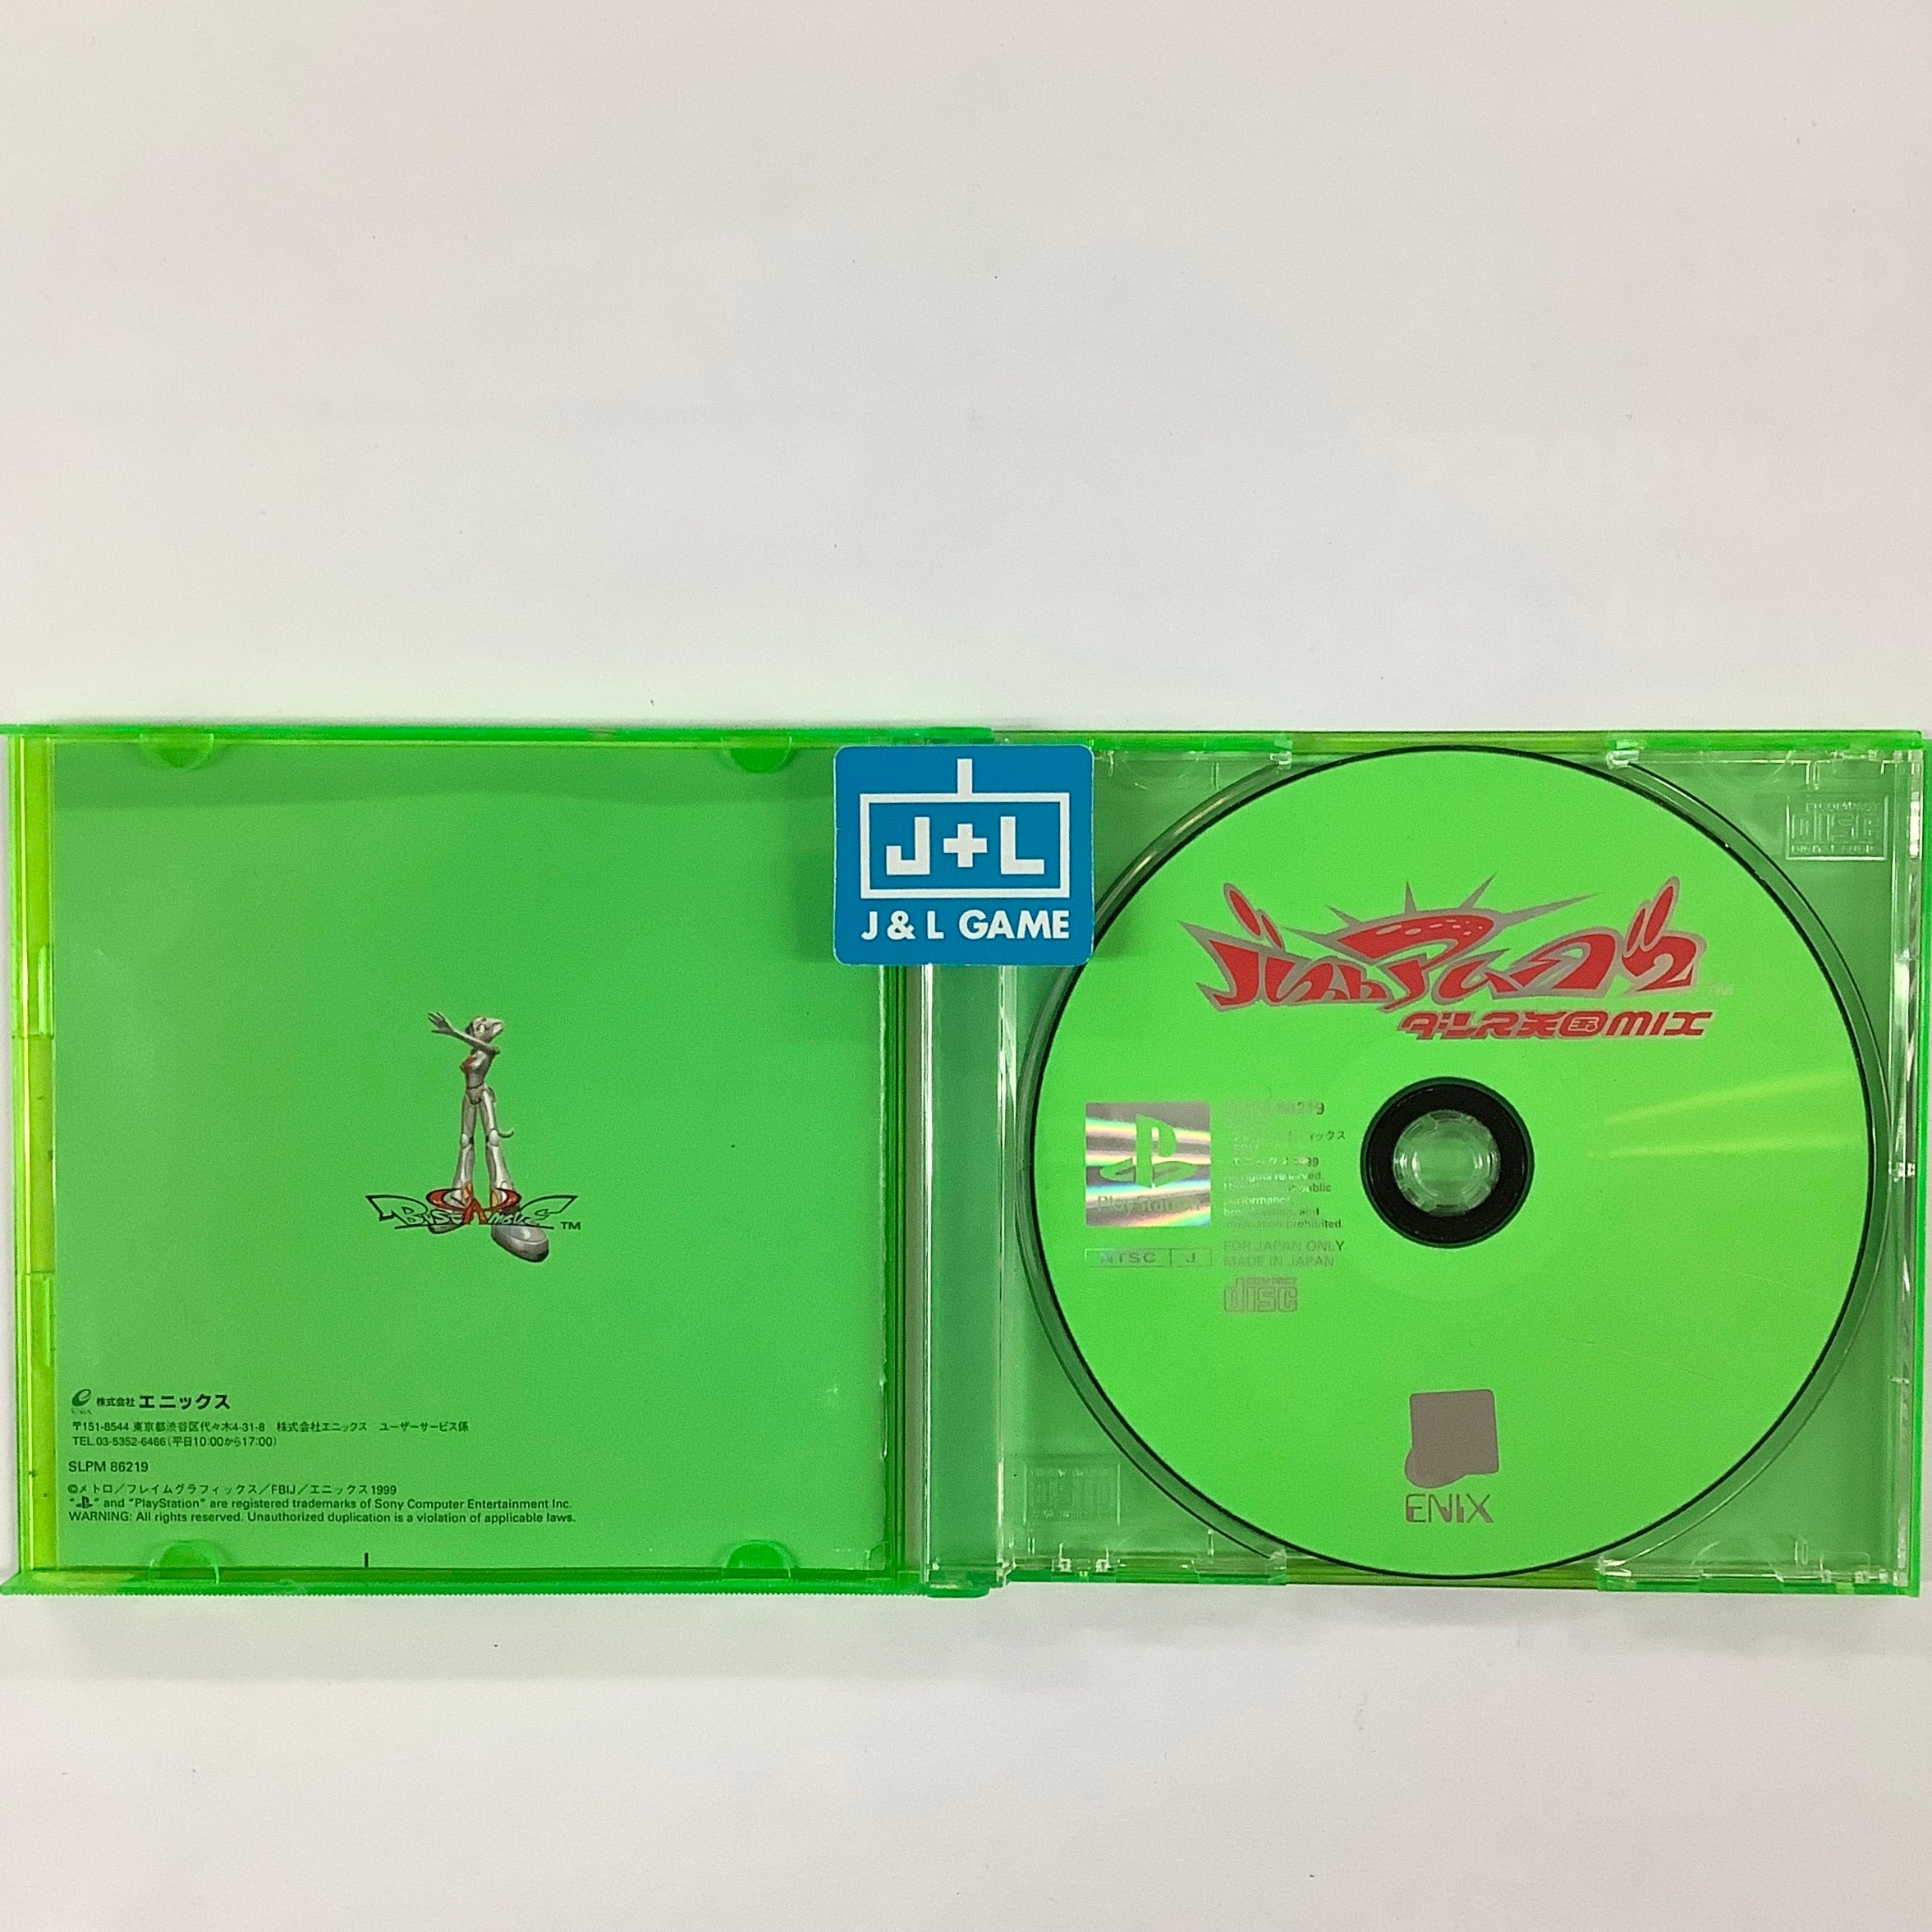 Bust A Move 2: Dance Tengoku Mix - (PS1) PlayStation 1 (Japanese Import) [Pre-Owned] Video Games Enix Corporation   